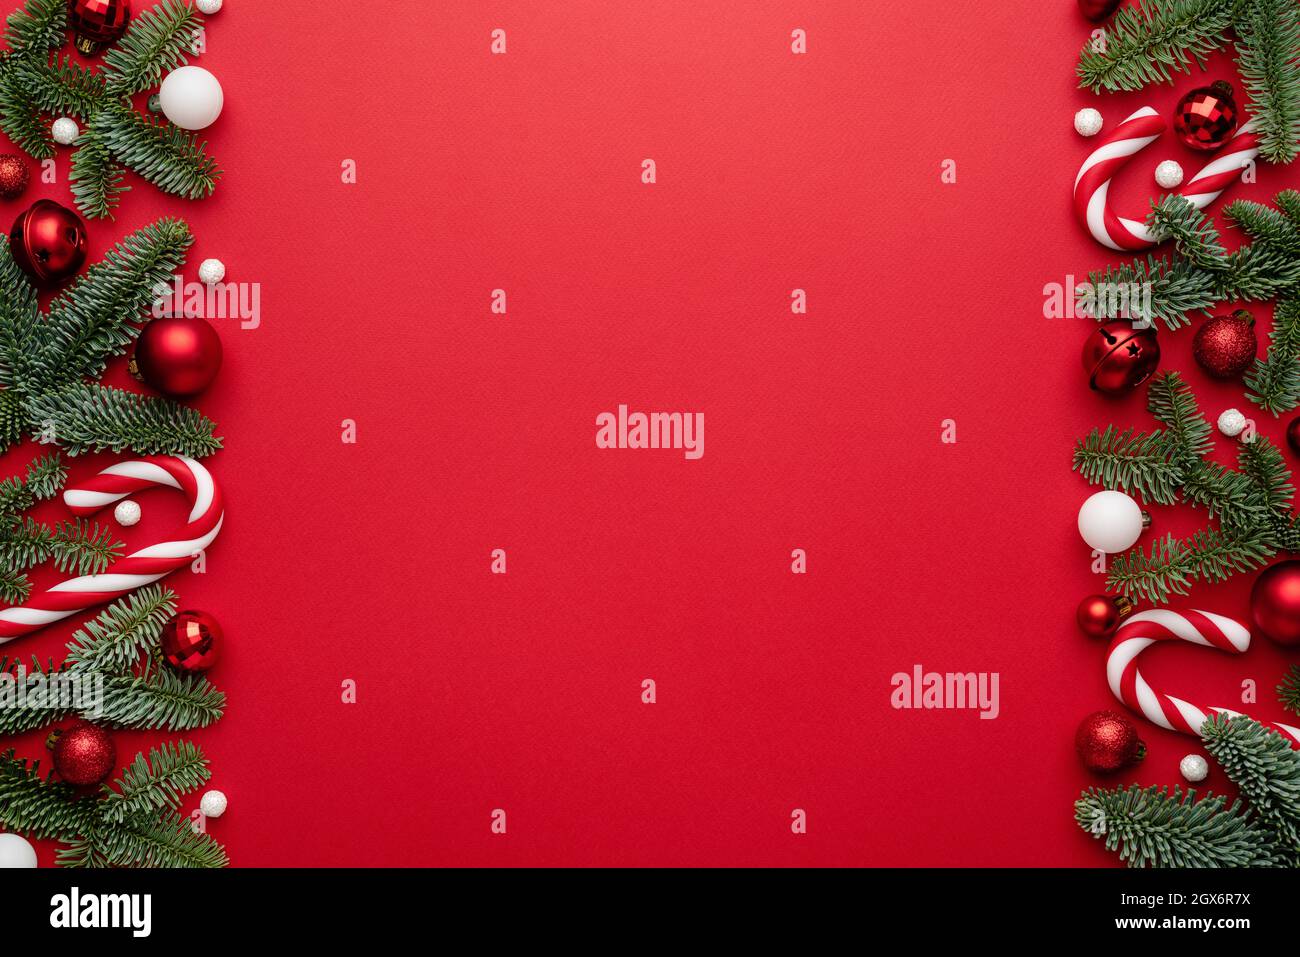 Red background with holiday border for Christmas design. Blank with a ...